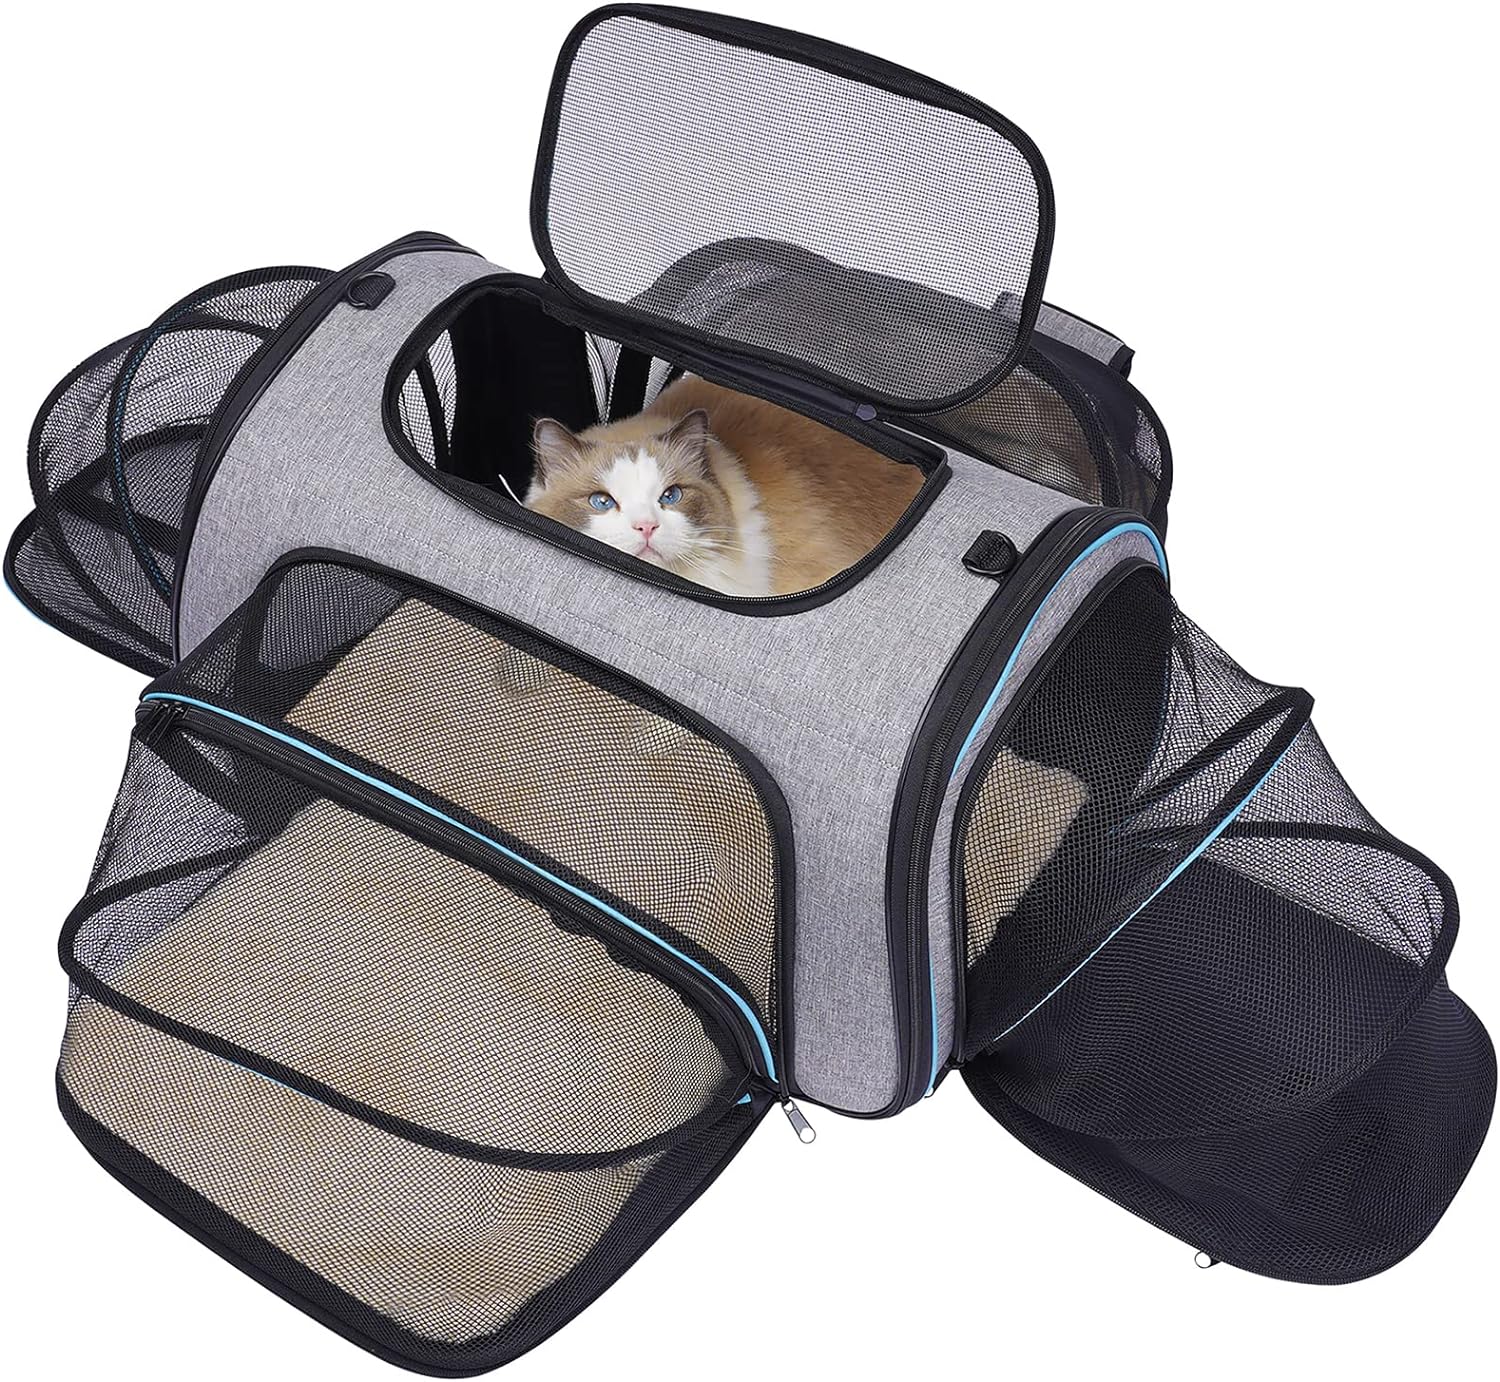 Siivton Pet Carrier With Expandable Sides